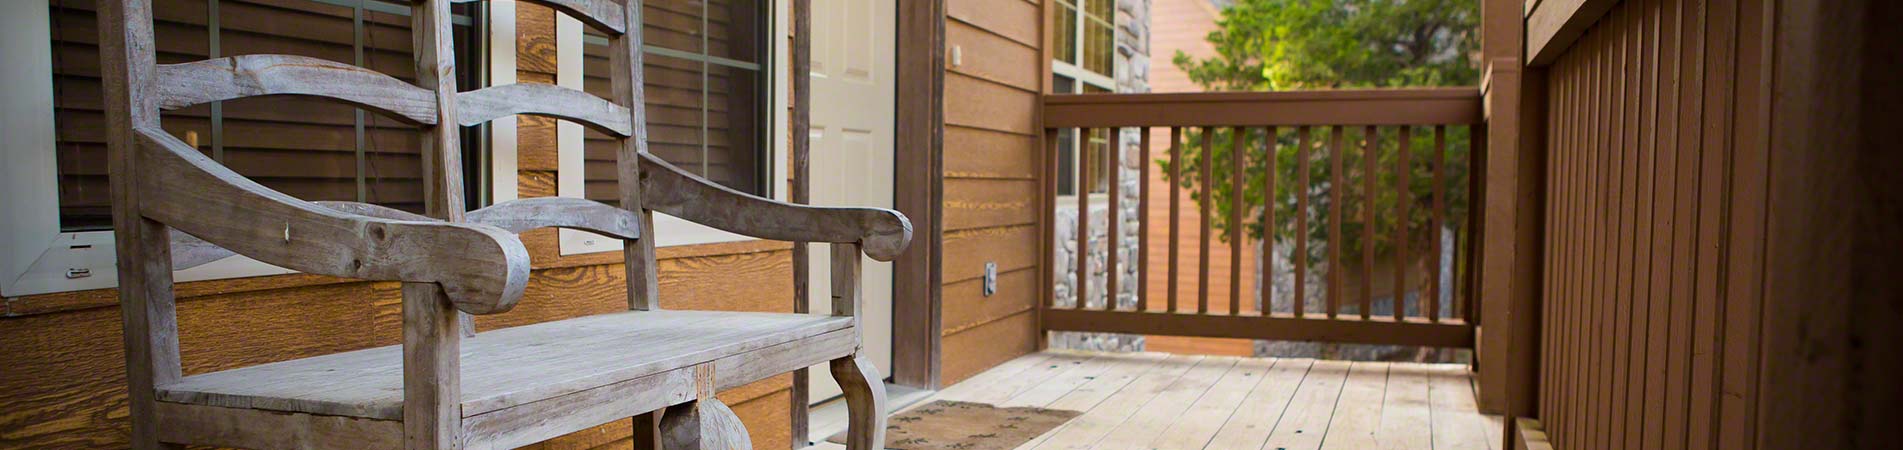 The relaxing porch you'll find with a lot of amazing Branson, MO cabins.